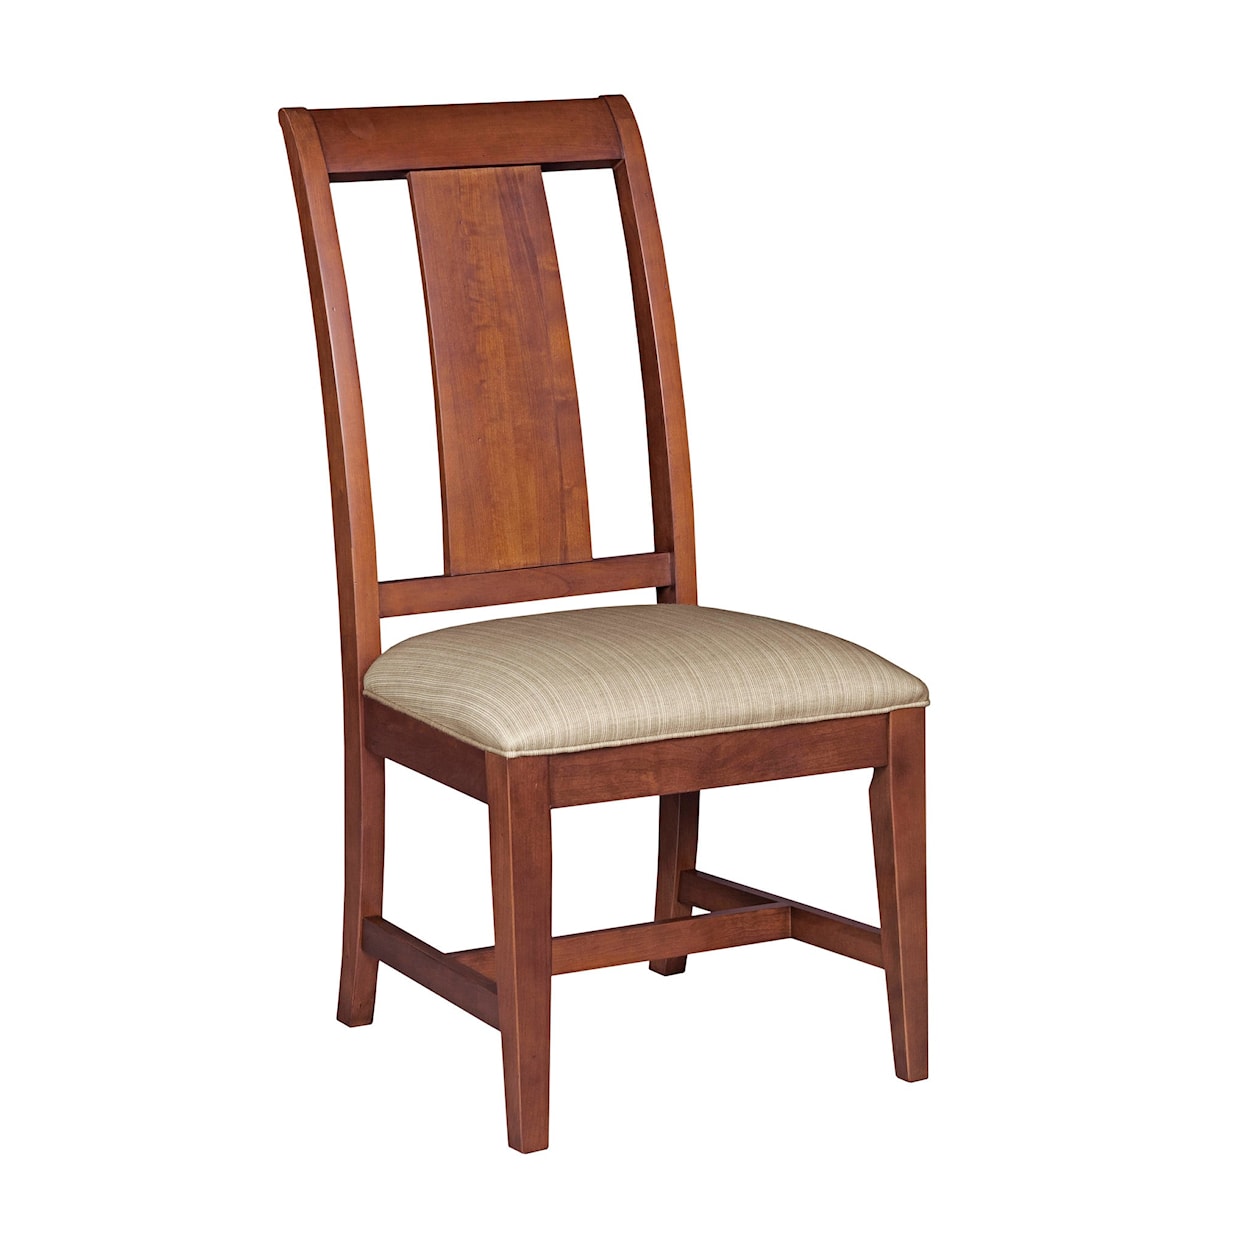 Kincaid Furniture Cherry Park Side Chair Upholstered Seat